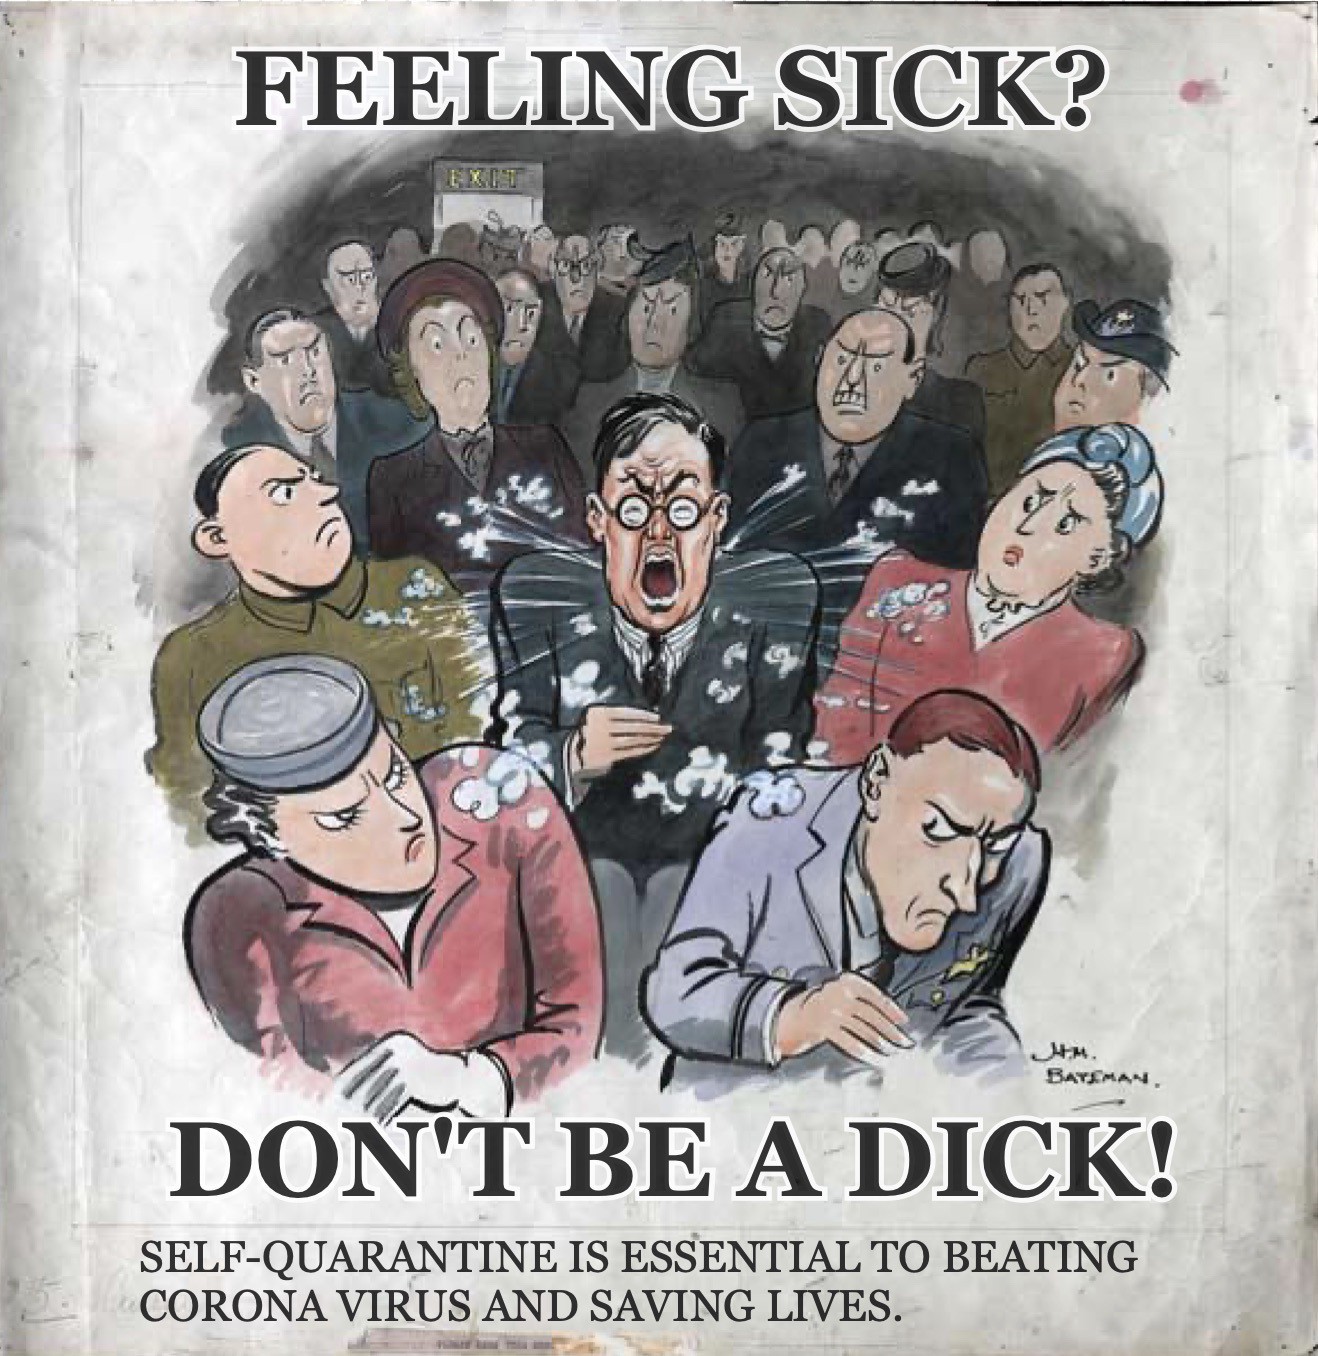 A world war 2 style poster with a man coughing in a crowd witht he phrase ‘Feeling sick? Don’t be a dick. Self-quarantine is essential to beating Corona Virus and saving lives.’